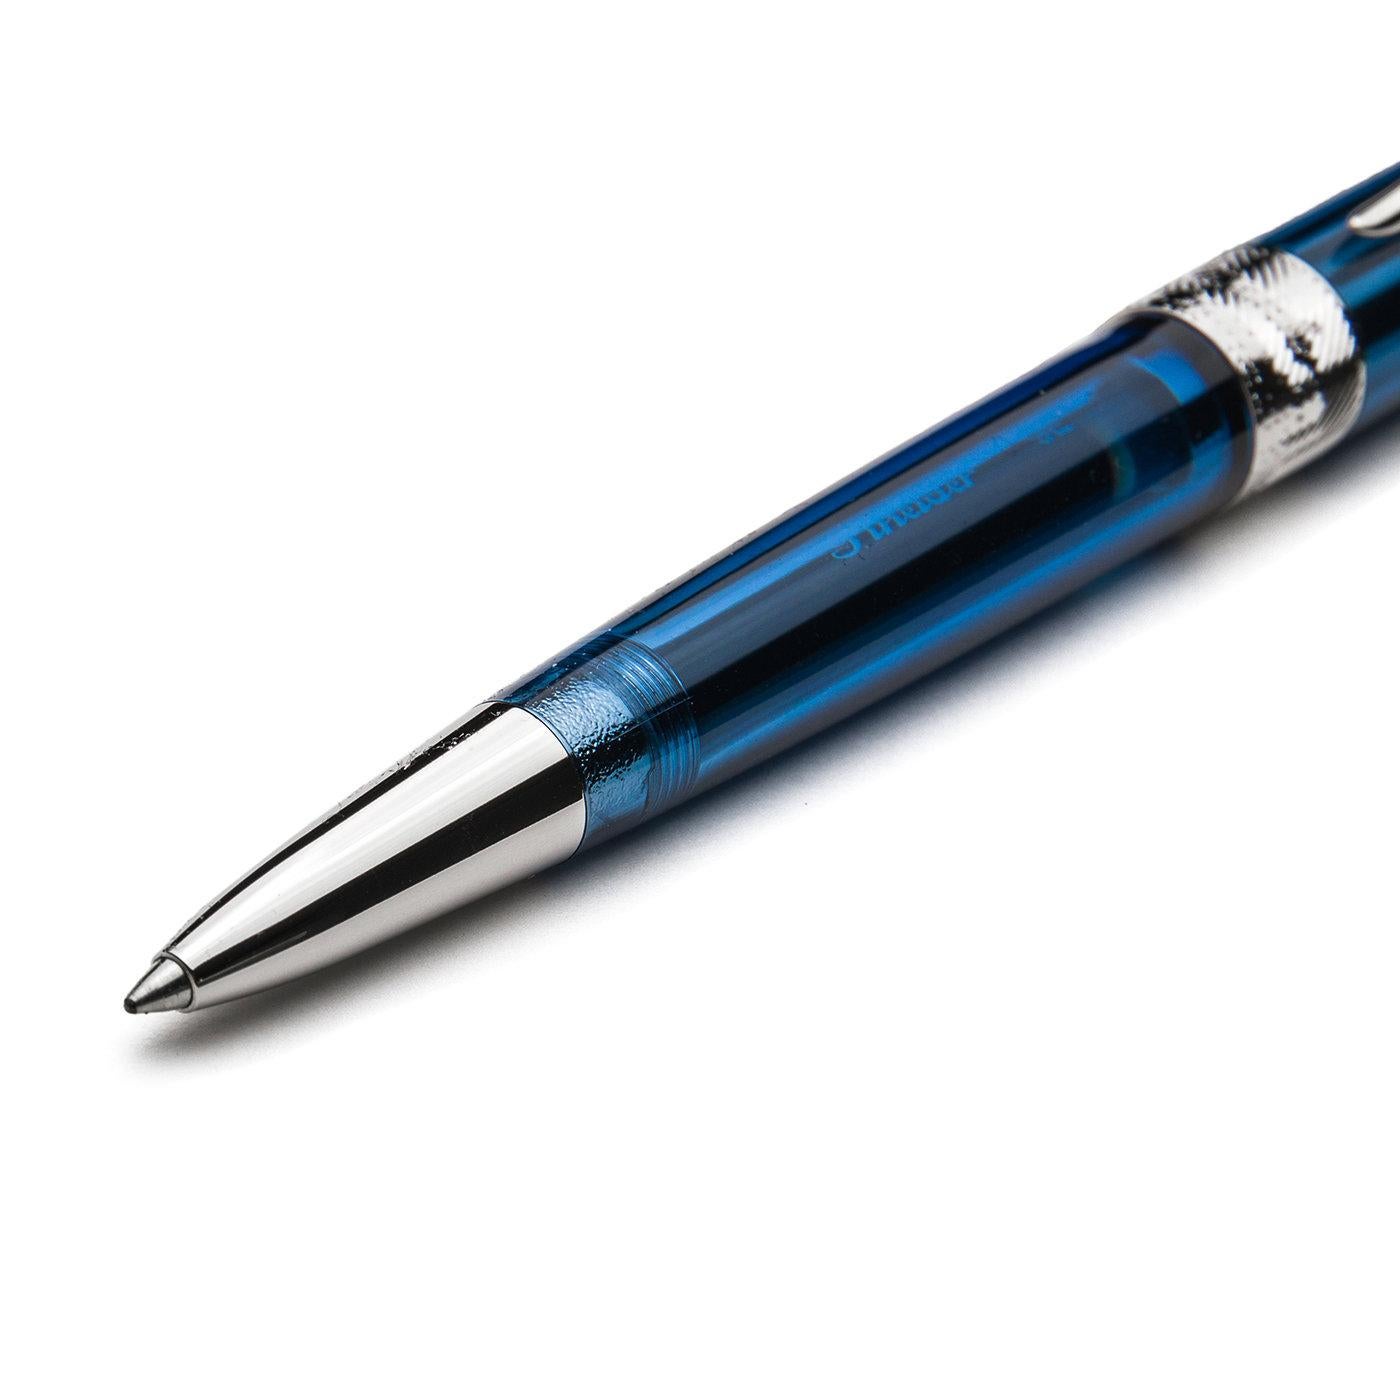 Available in multiple colors, this exclusive blue ballpoint pen captures engineering and aesthetic excellence. Its silhouette is made of perfectly interlocking parts with the use of glues and is fashioned of Ultra Resin, a material mixing nacre and